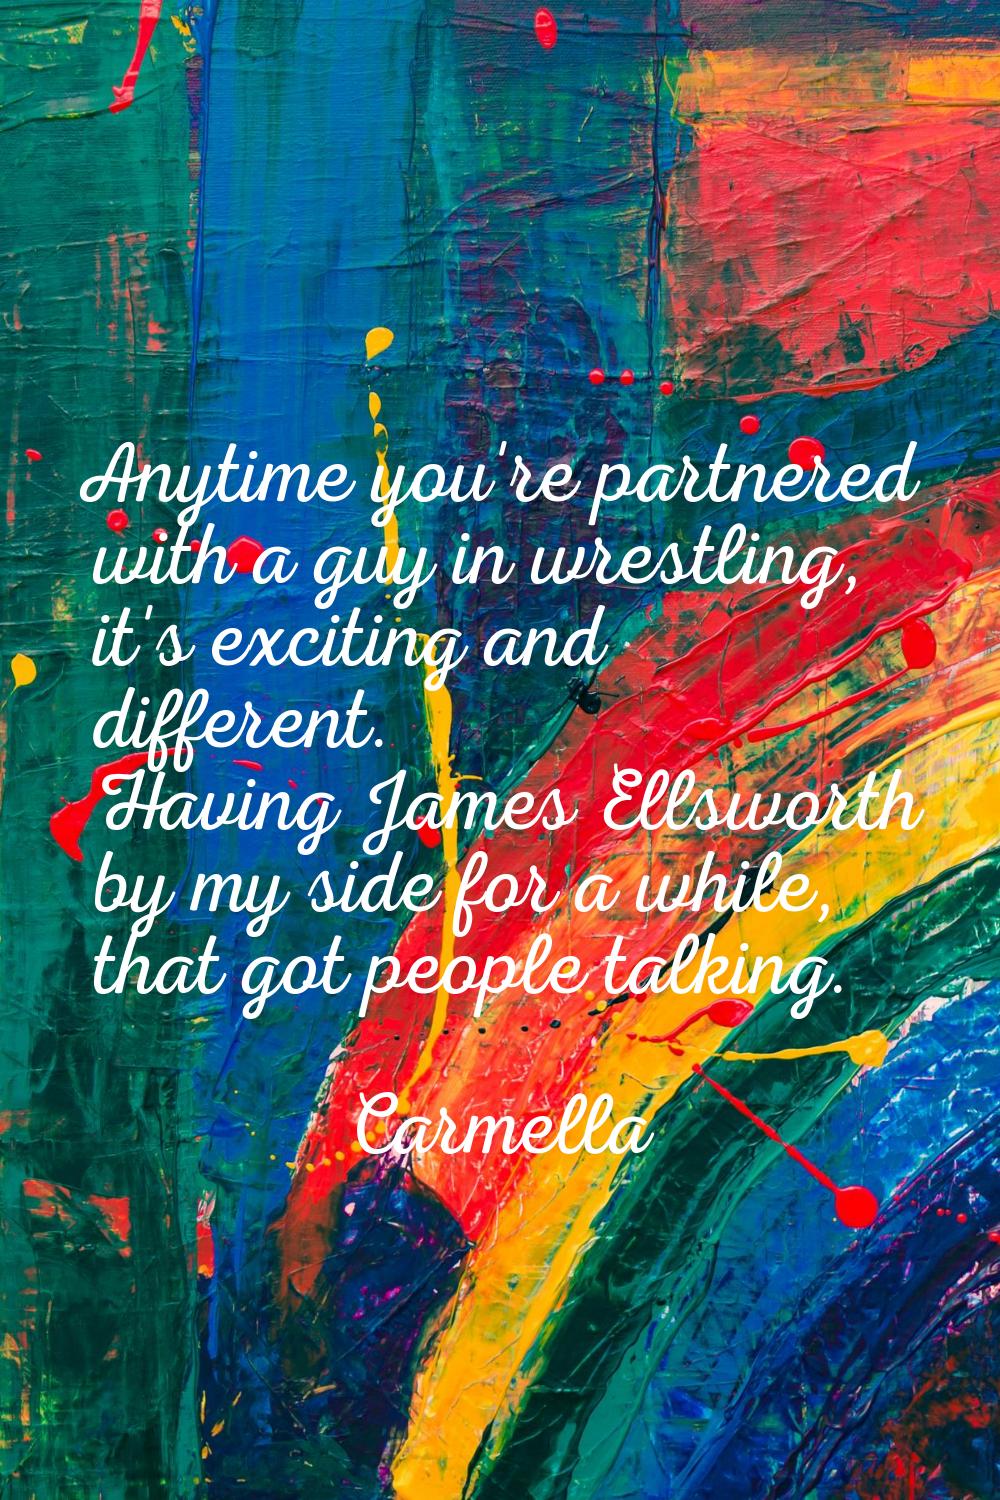 Anytime you're partnered with a guy in wrestling, it's exciting and different. Having James Ellswor